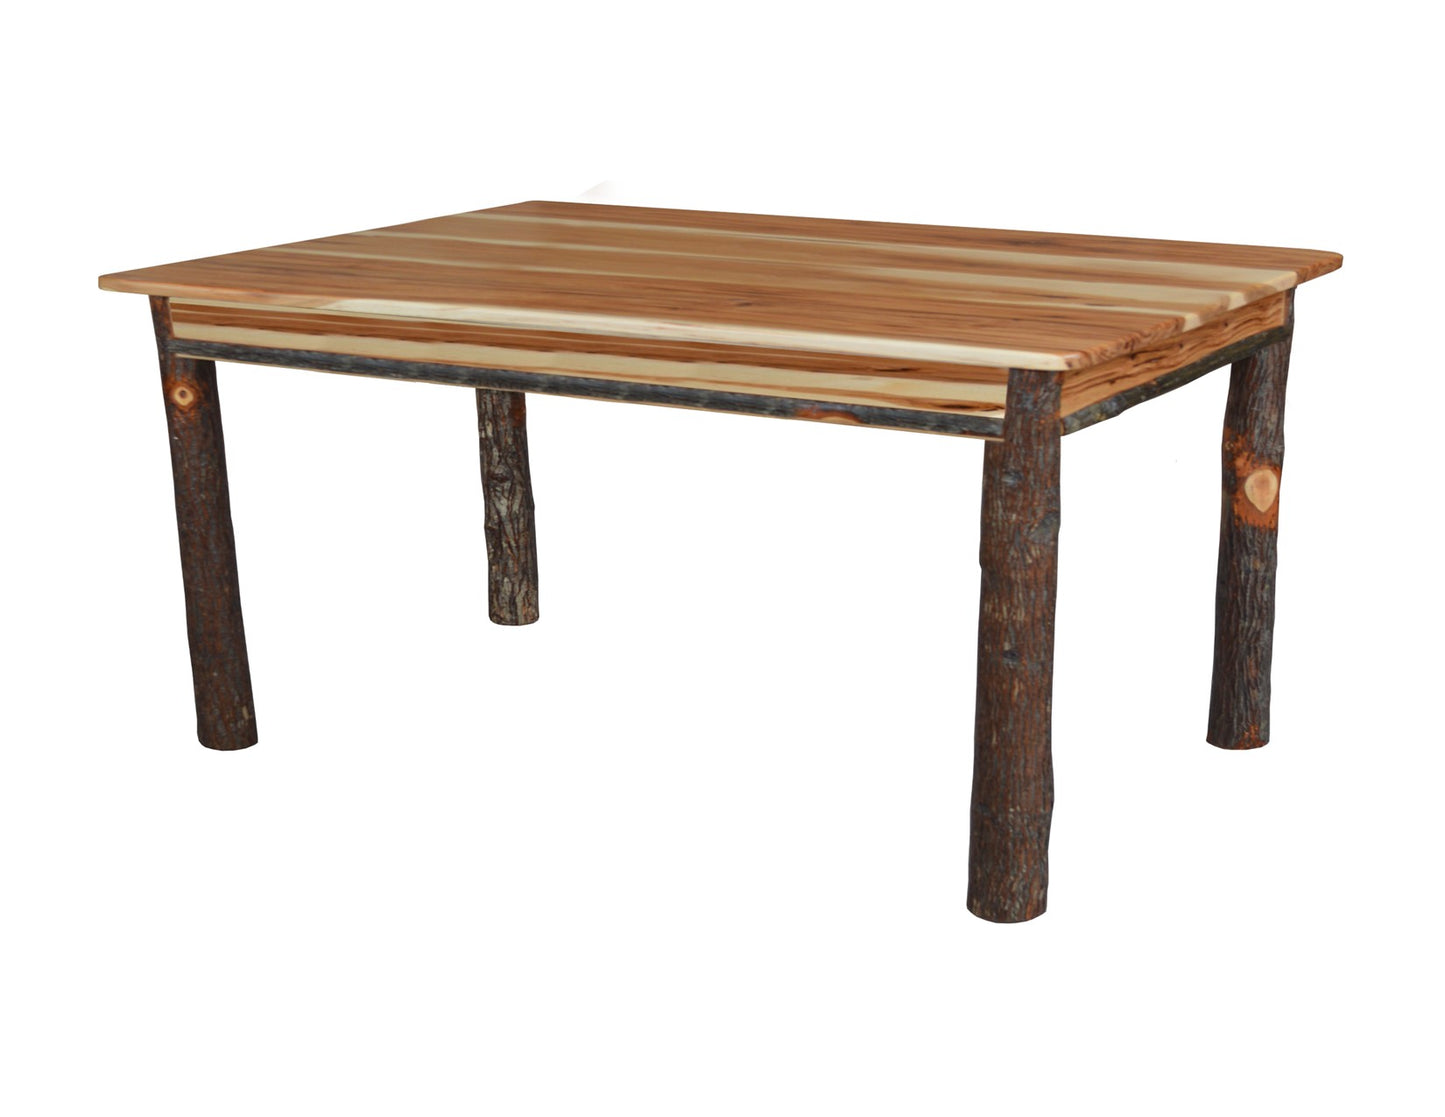 A&L Furniture Co. 5' Hickory Farm Table - LEAD TIME TO SHIP 4 WEEKS OR LESS